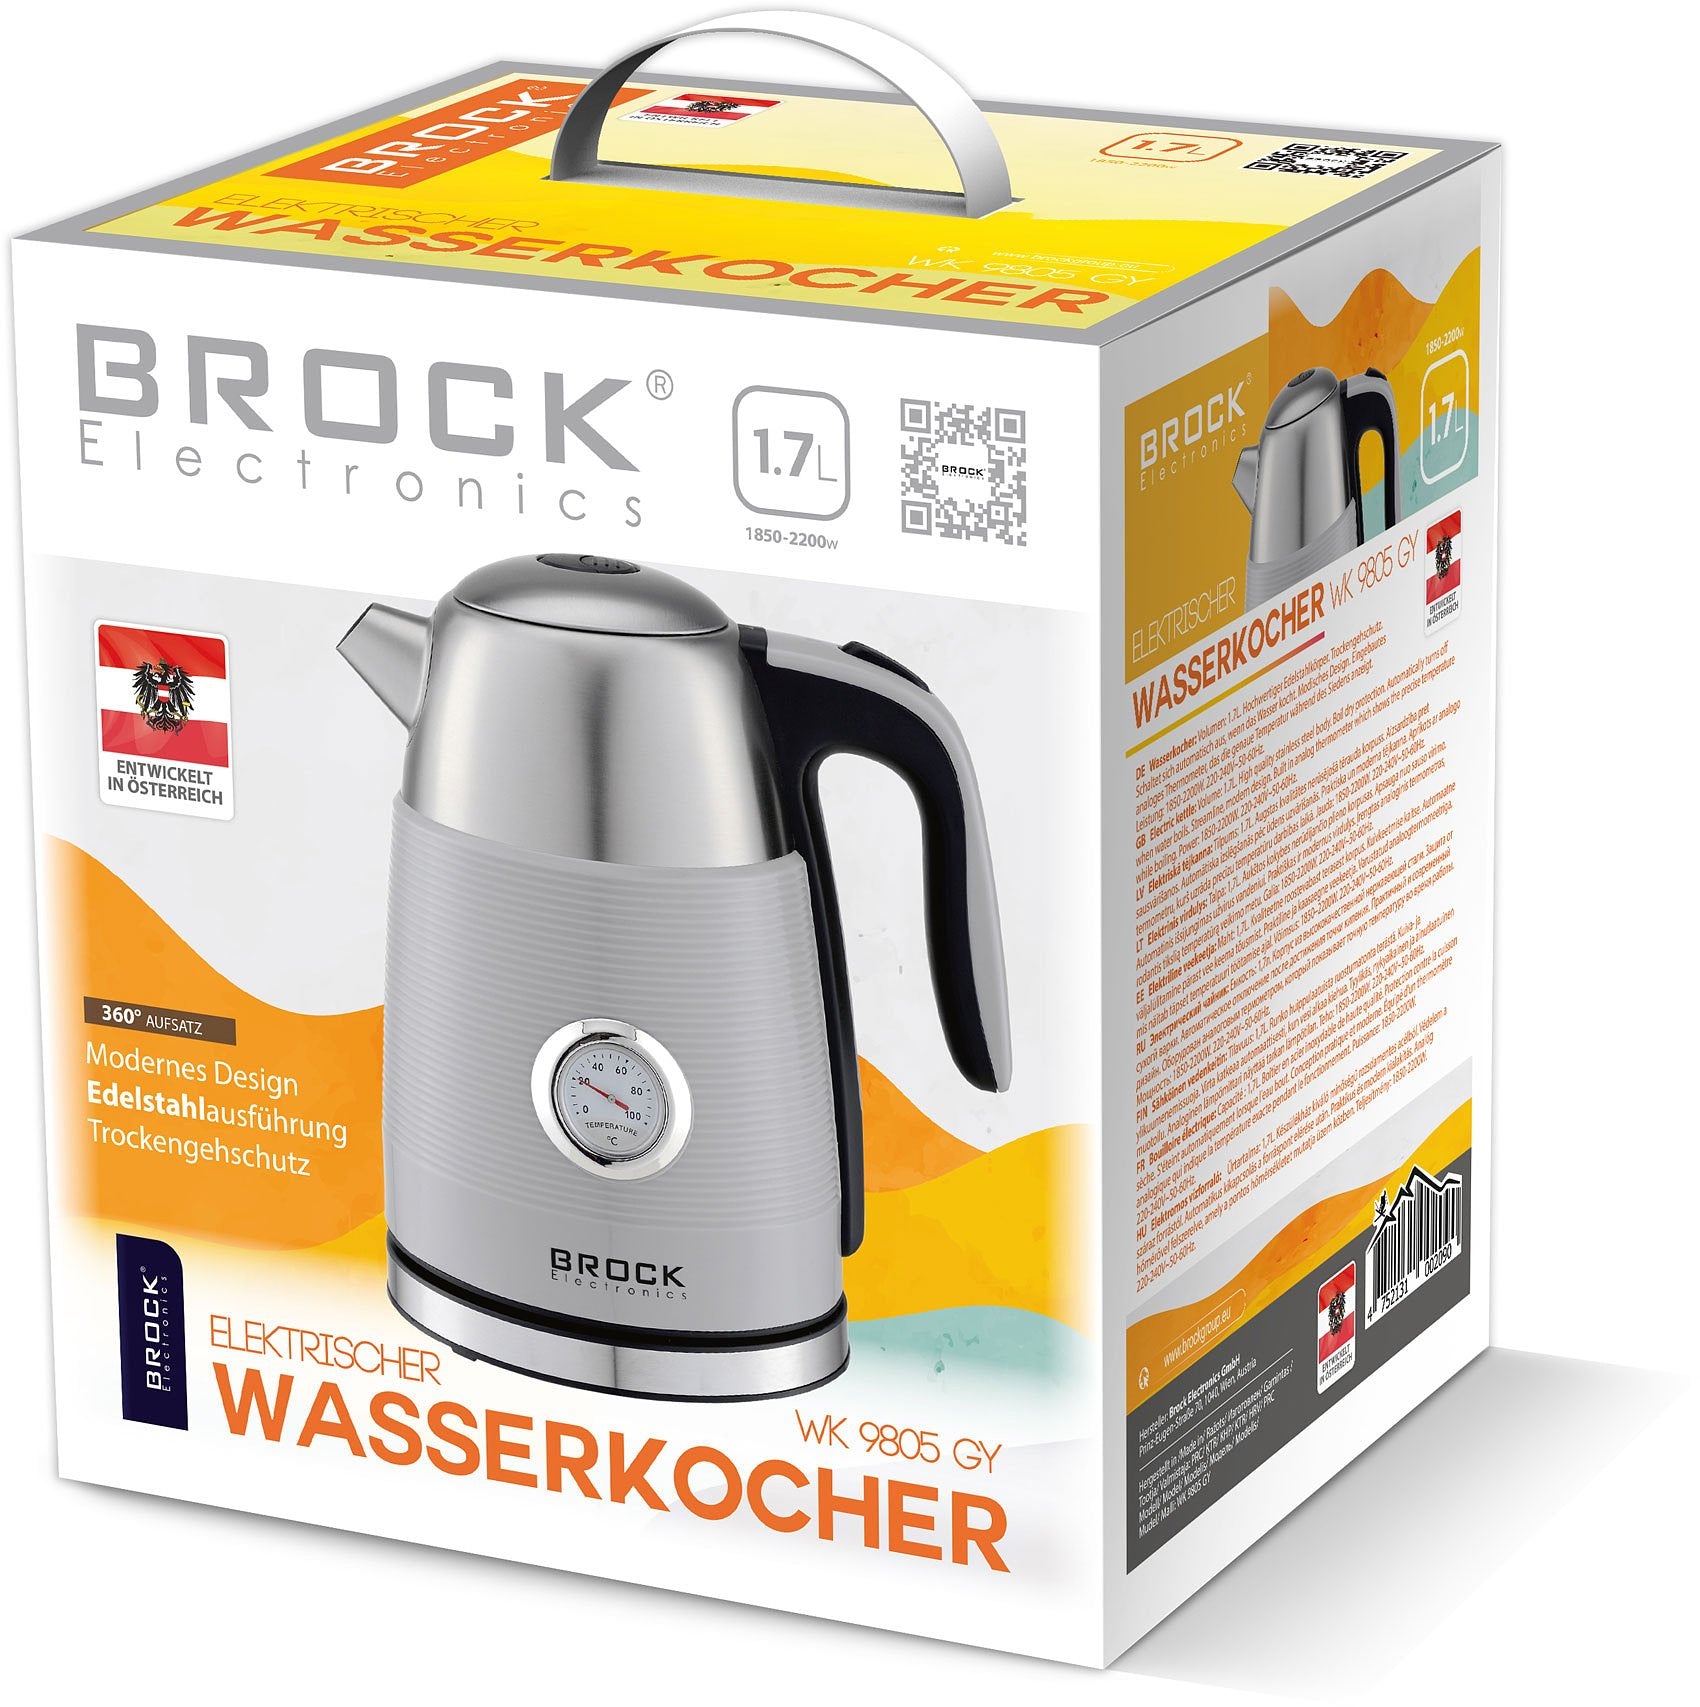 BROCK Electronics Waterkoker WK 9805 GY (Zilver, Thermometer, 1.7 liter)